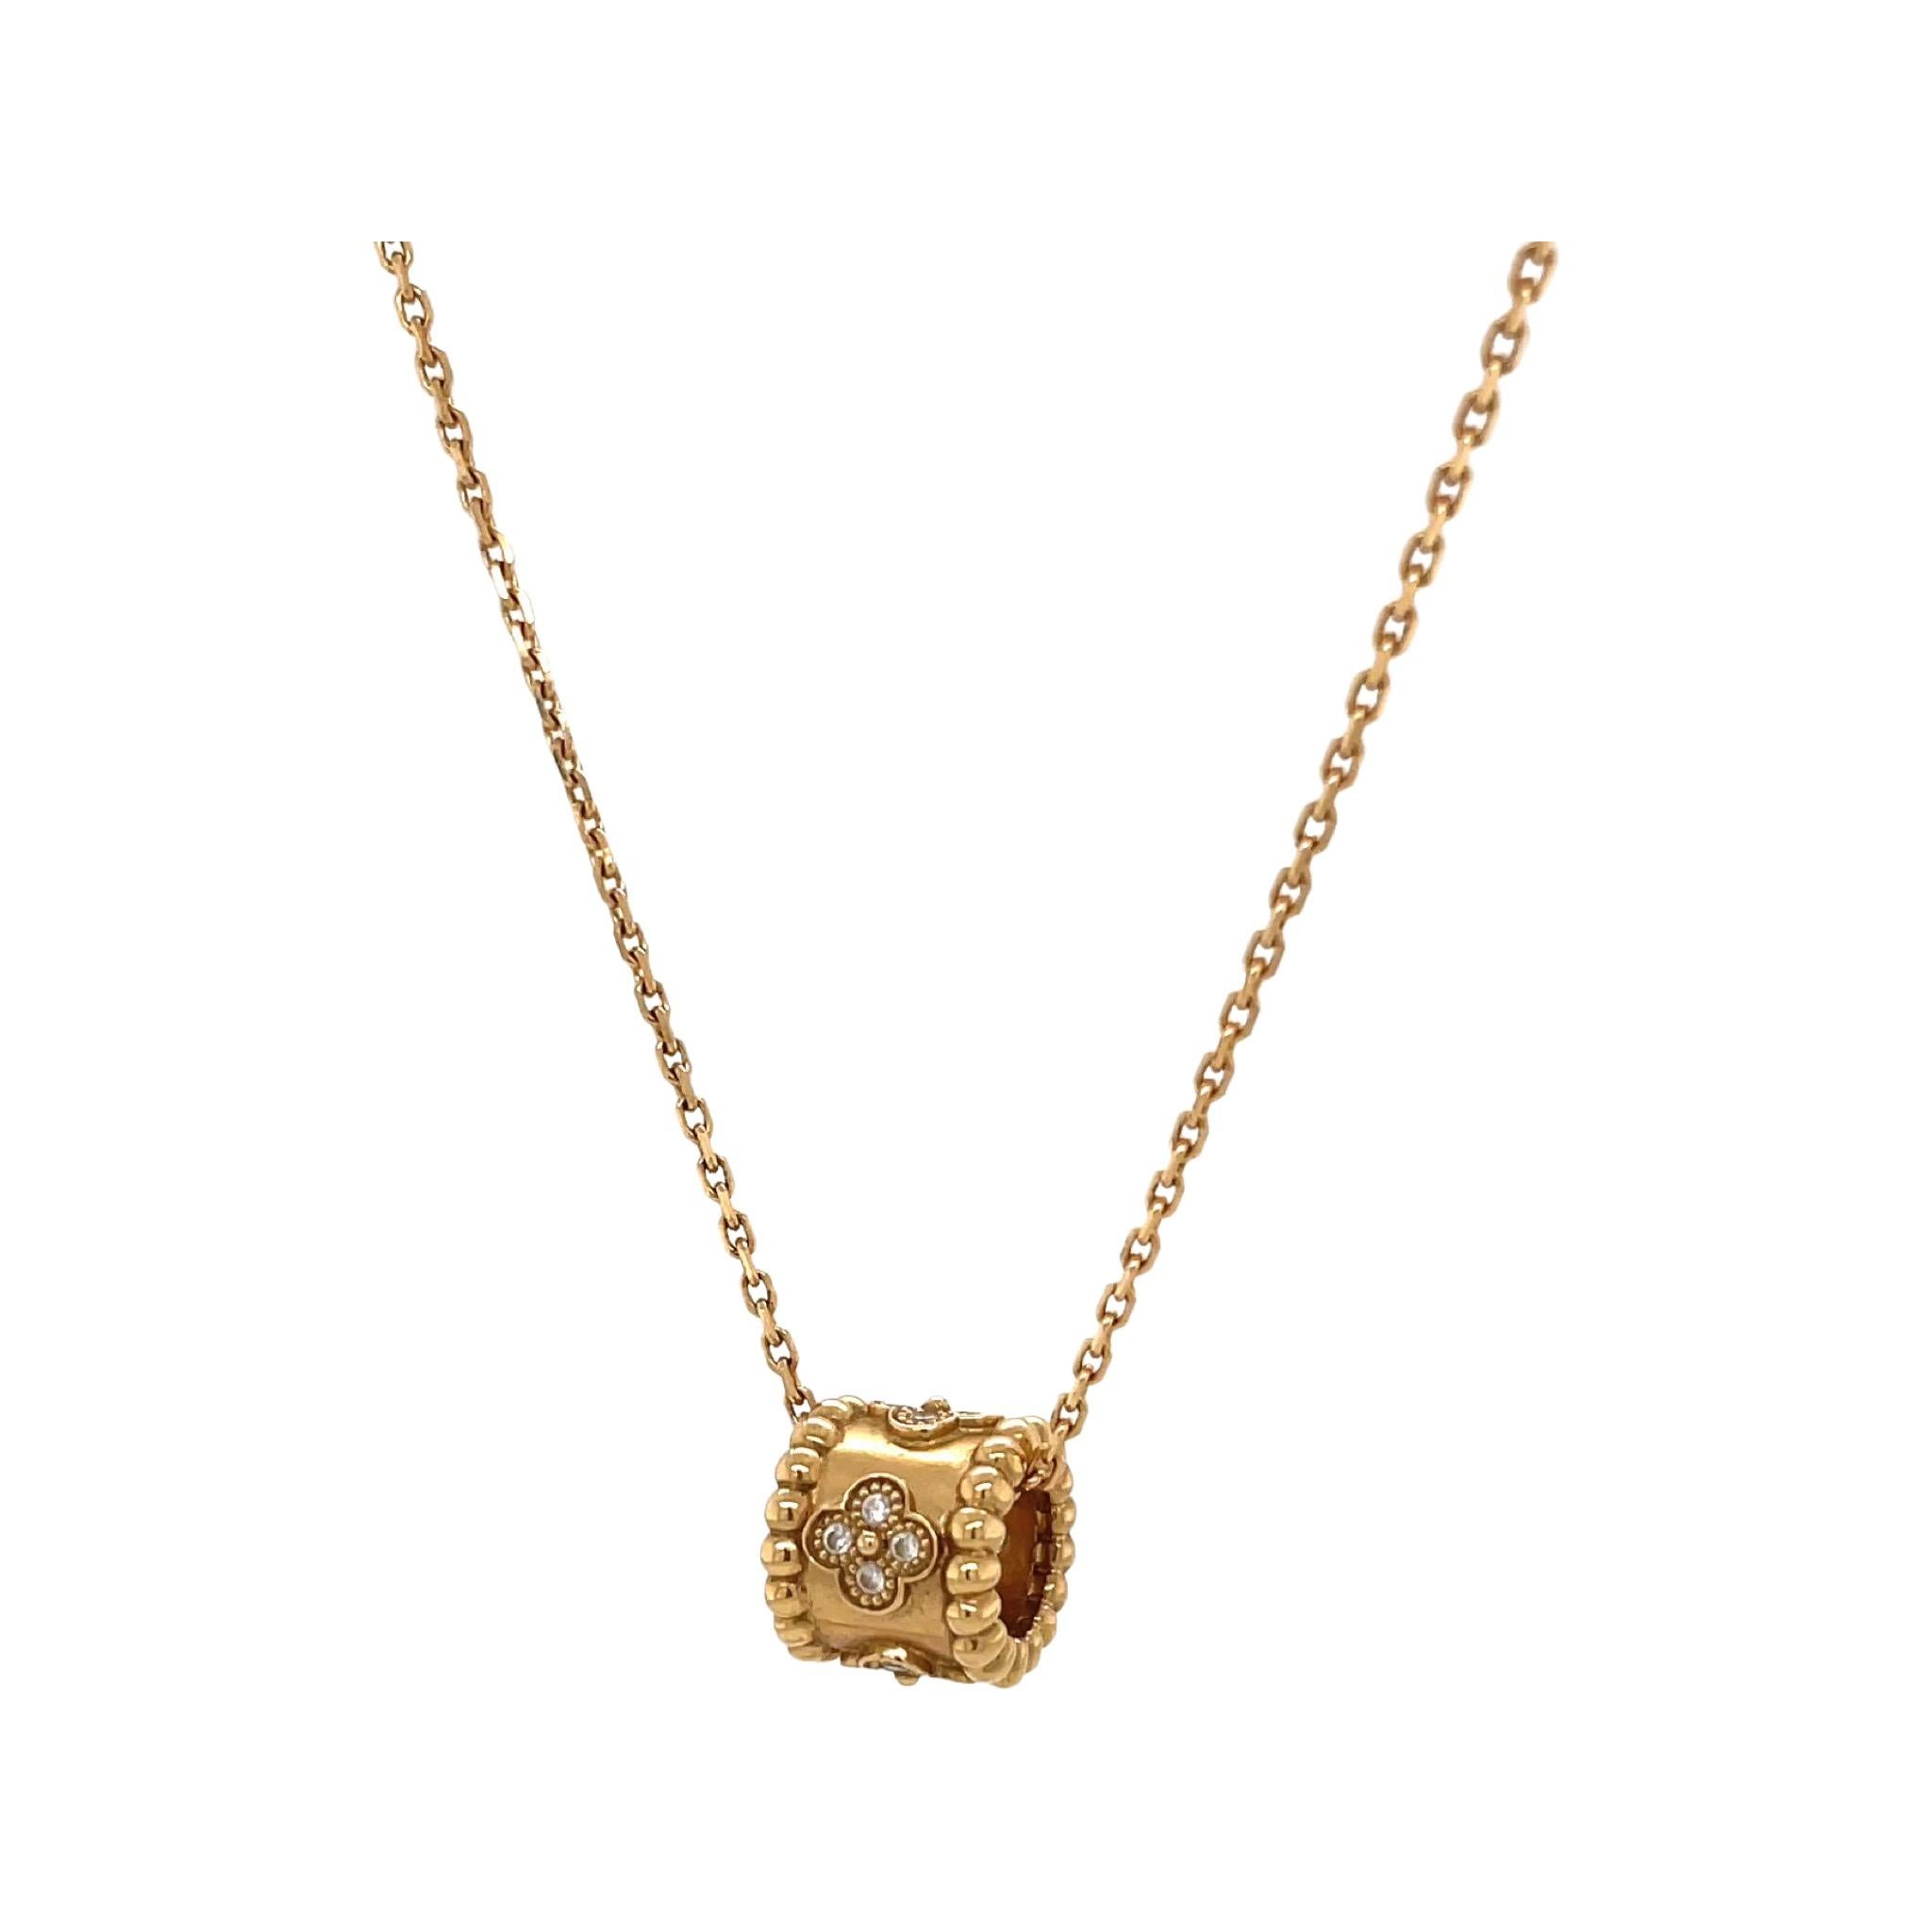 One Vintage Van Cleef & Arpels Diamond 18k Gold Perlée Clovers Pendant Necklace. Featuring 16 round brilliant cut diamonds with a total weight of approximately 0.16 carats, graded D-E color, VVS clarity. Crafted in 18 karat yellow gold, signed VCA,